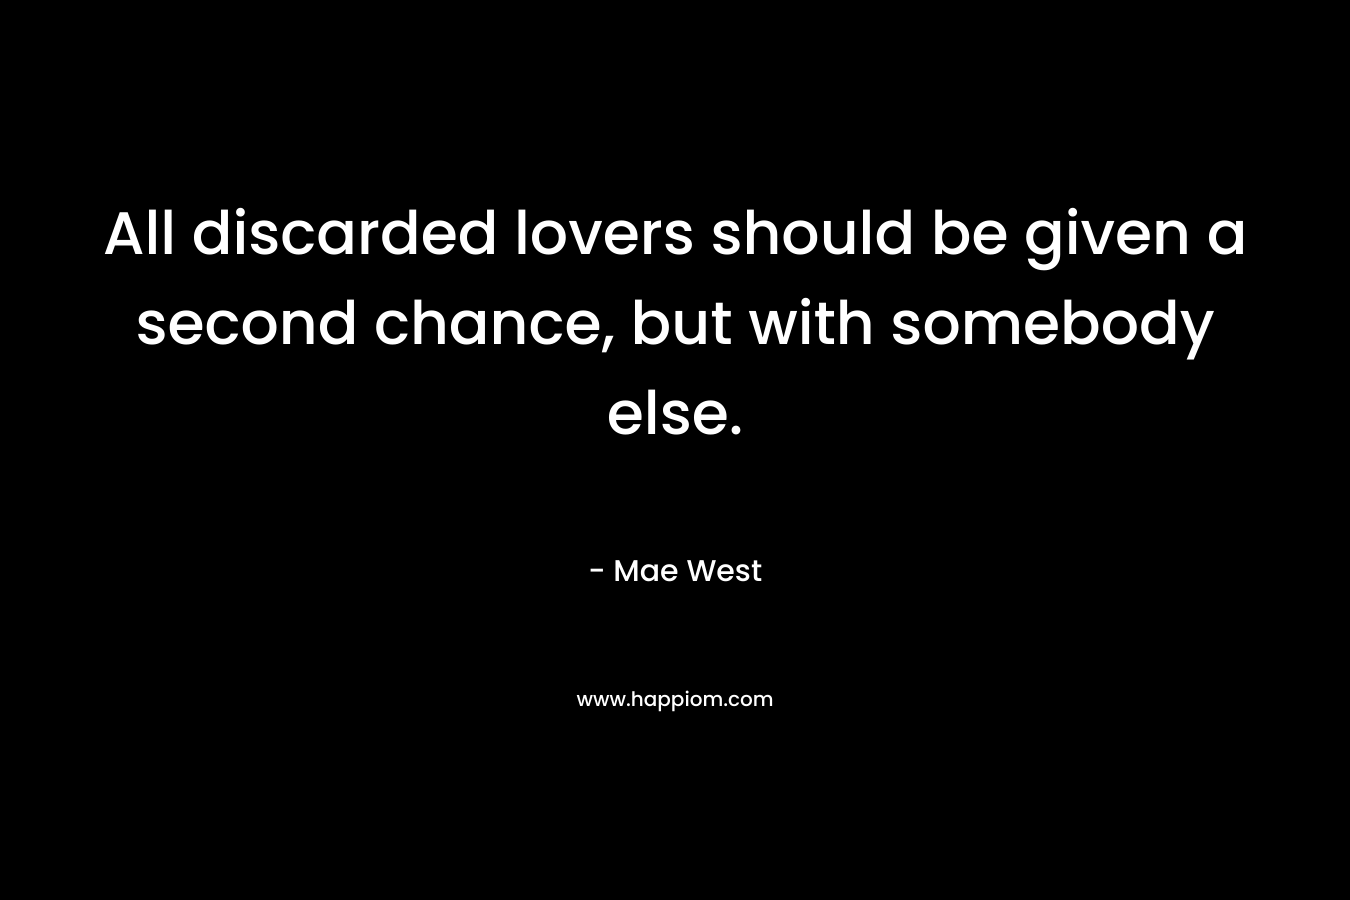 All discarded lovers should be given a second chance, but with somebody else.